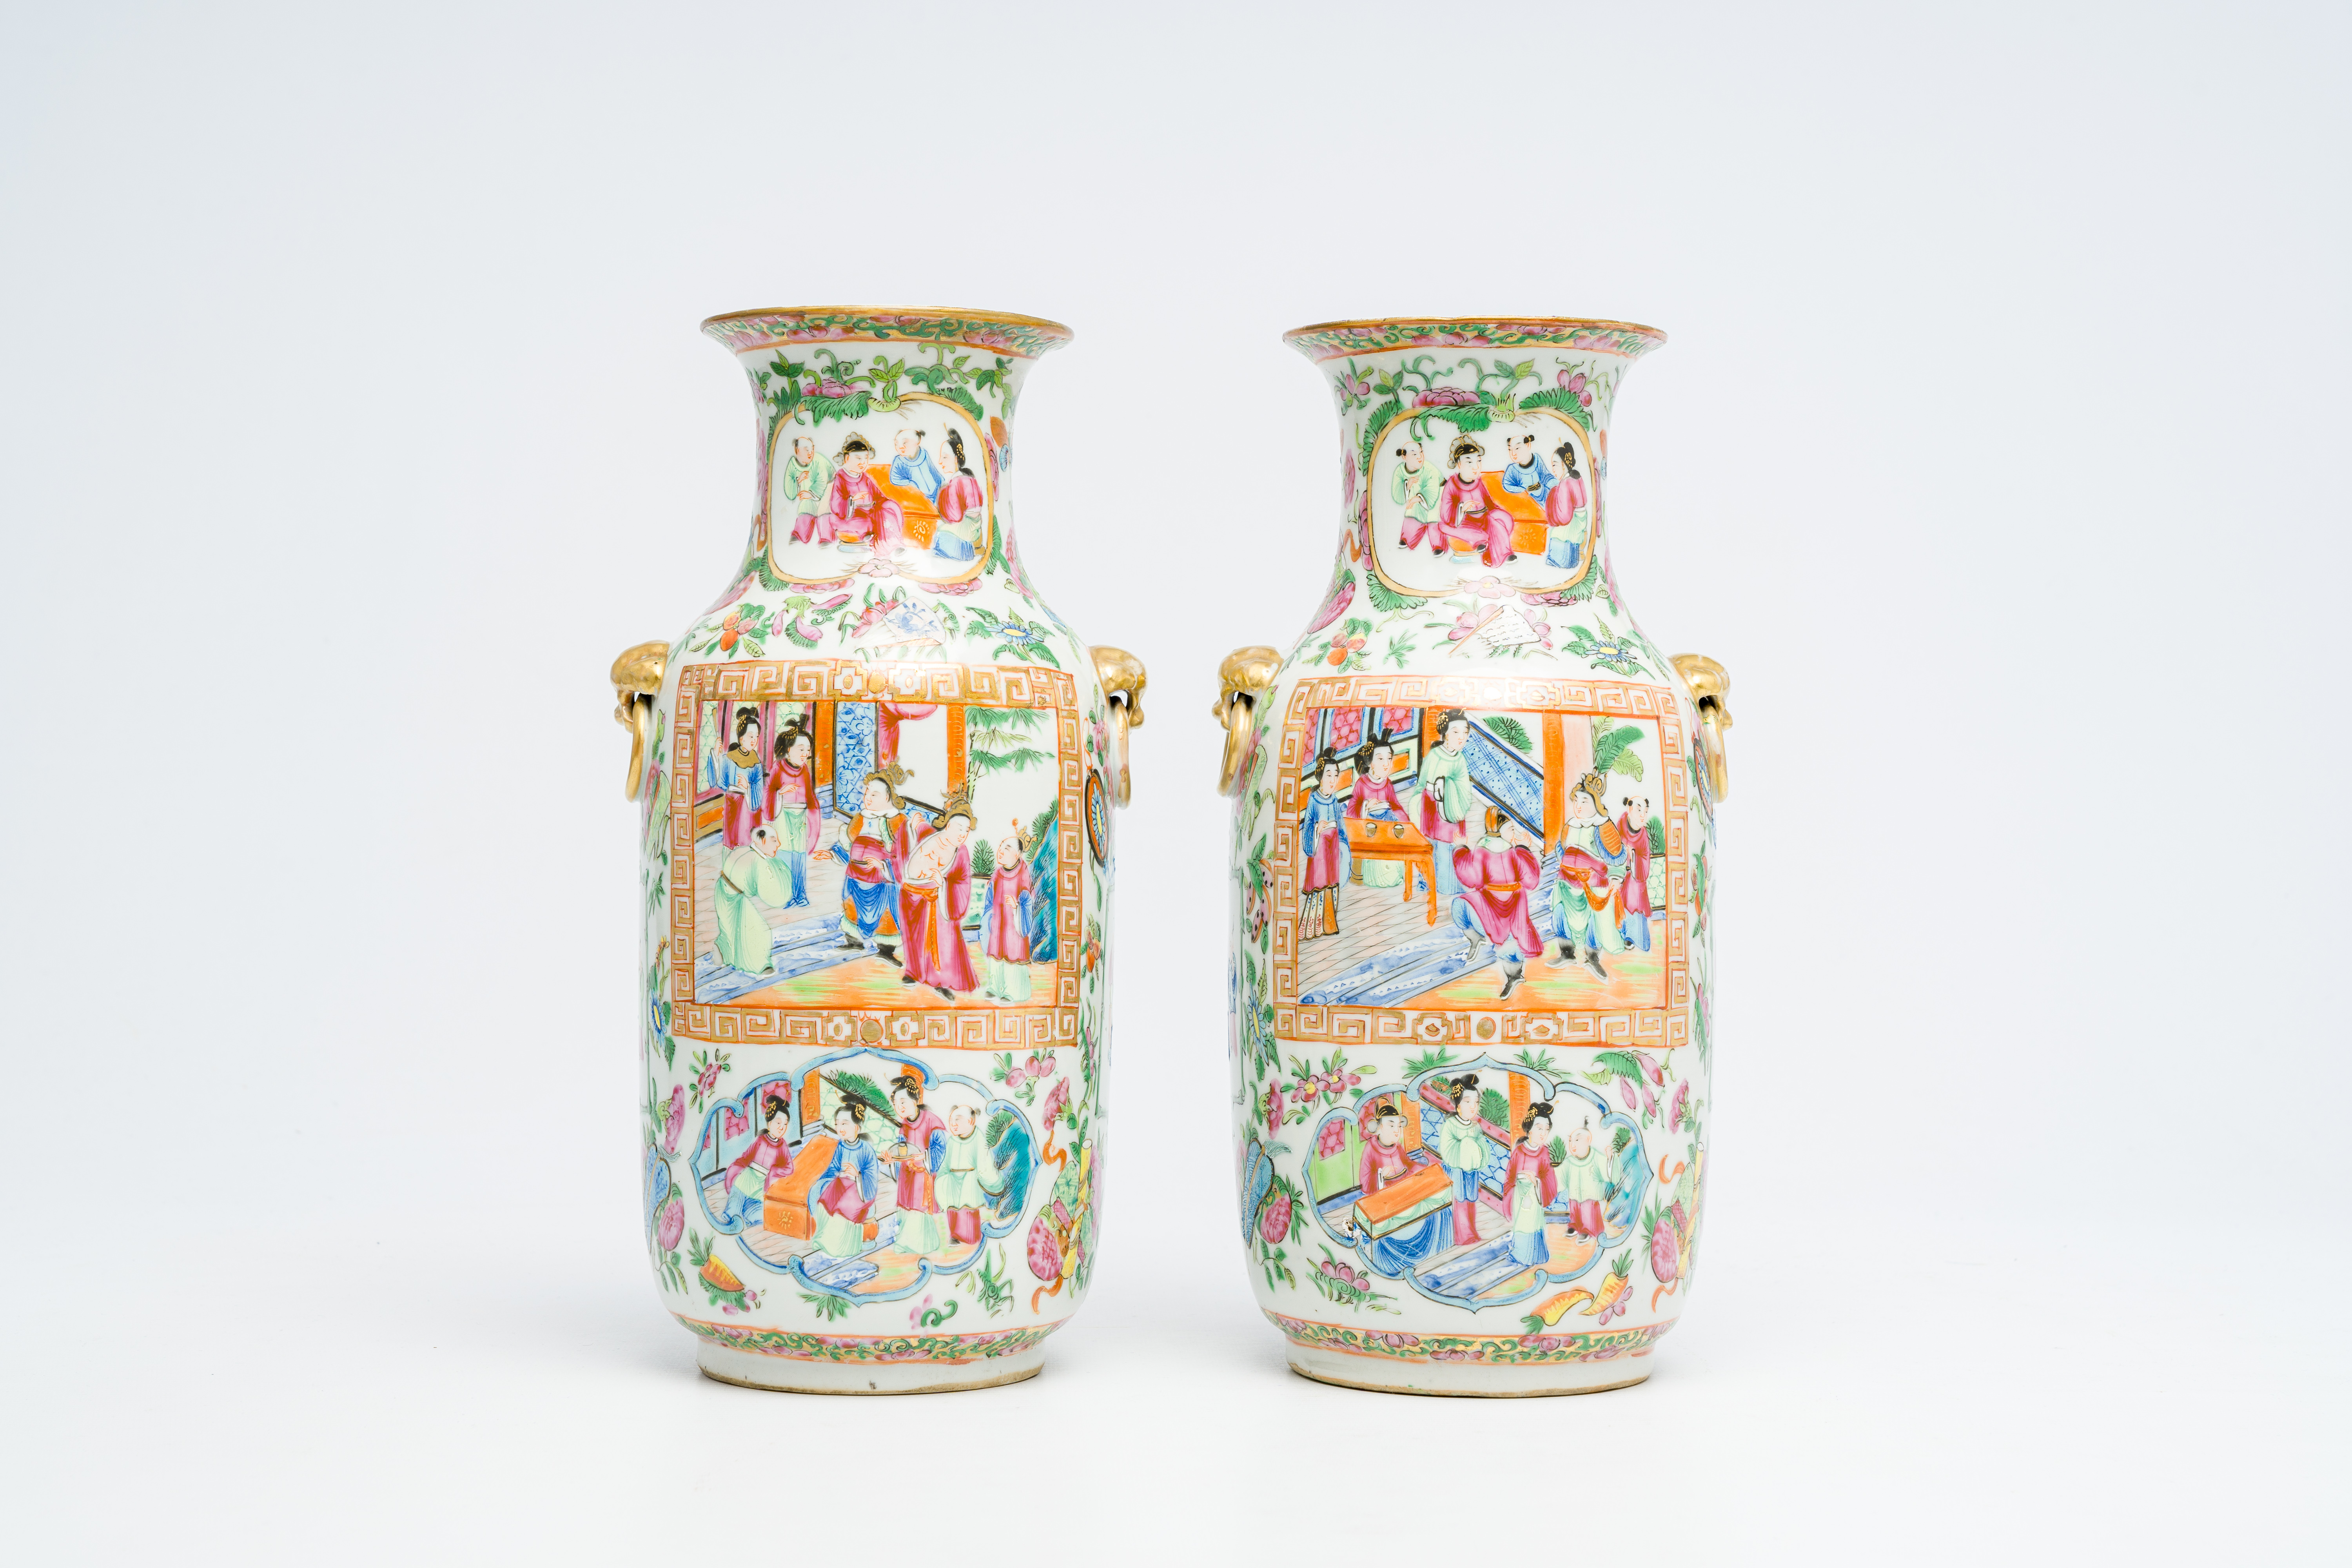 A pair of Chinese Canton famille rose vases with palace scenes and floral design, 19th C. - Image 3 of 6